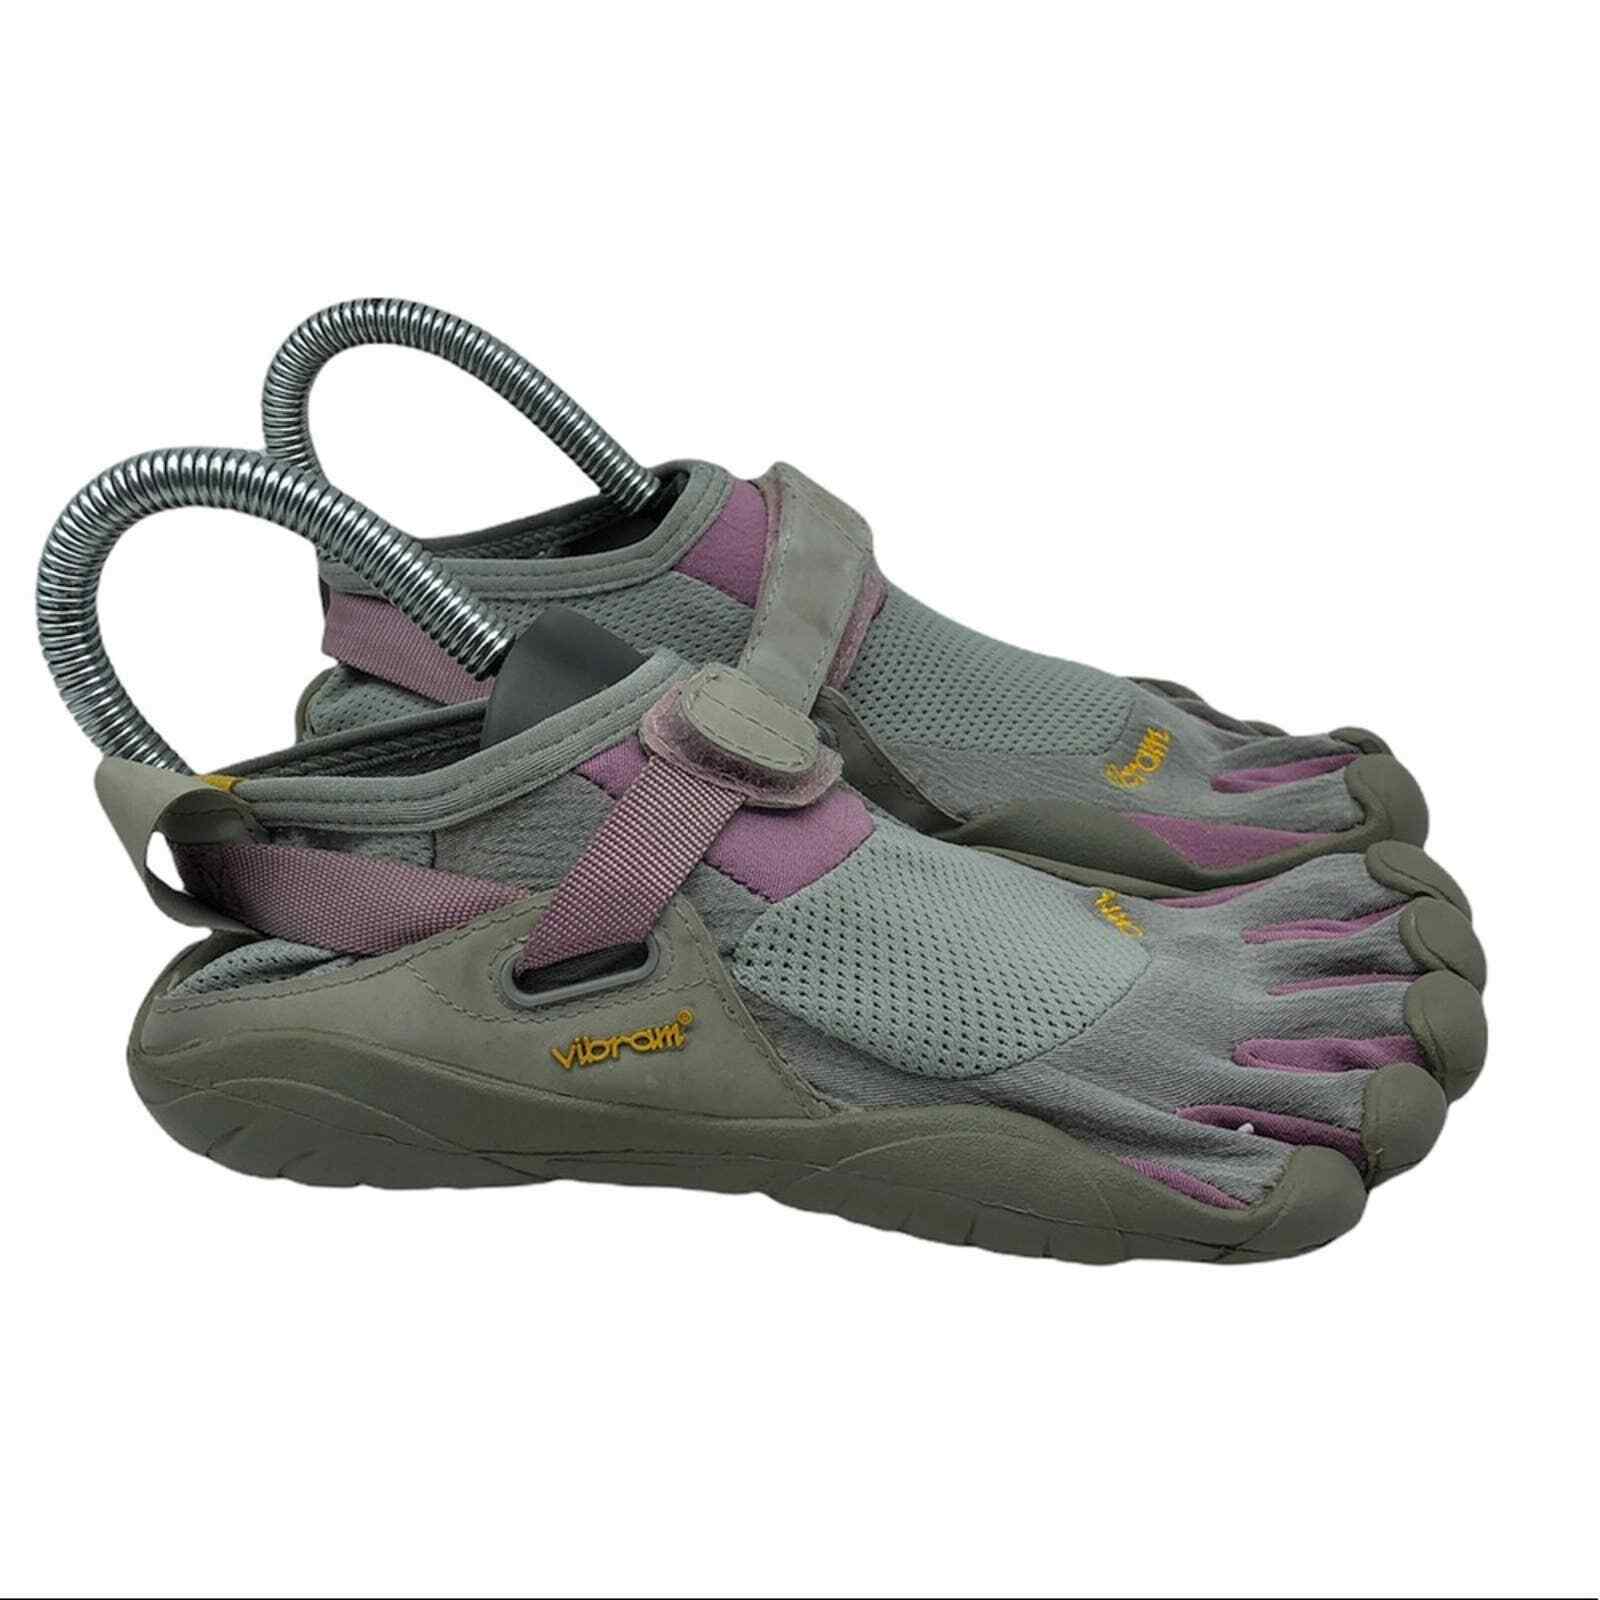 Vibram Womens Five Fingers Shoes size 36 w1459 Gray Pink Barefoot Minimal